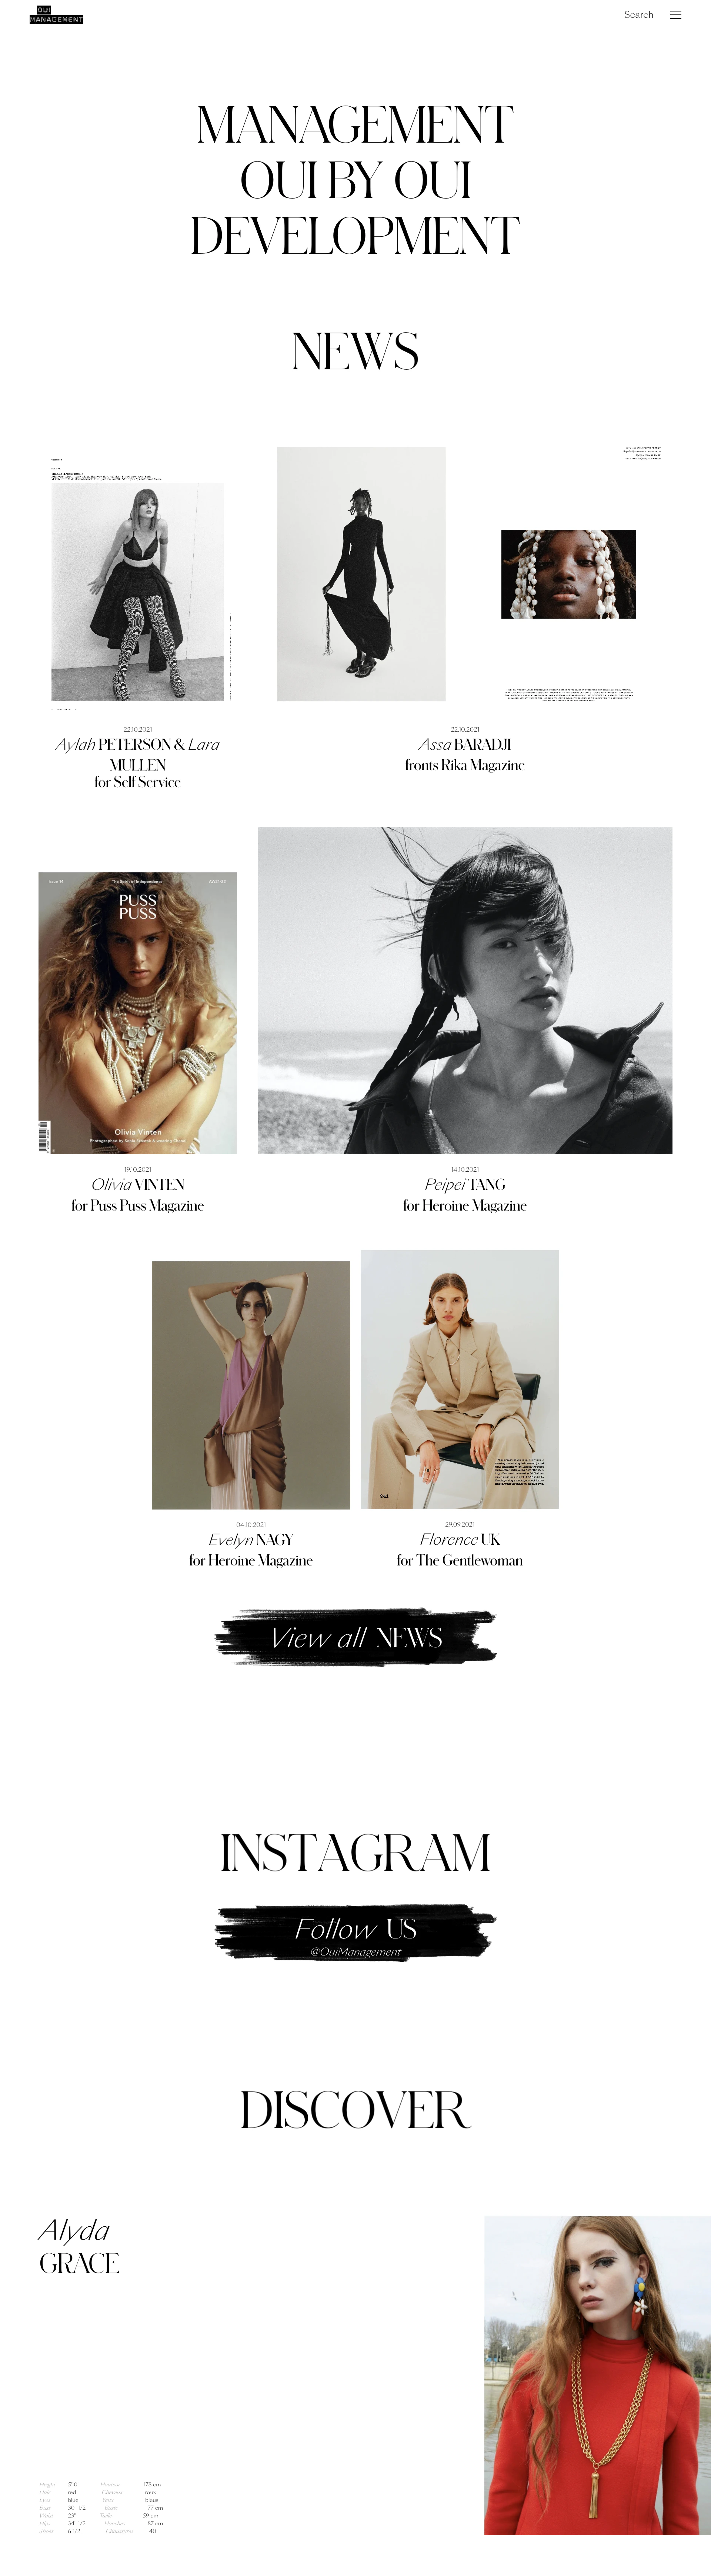 Oui Management Landing Page Example: Oui Management is a model management agency based in Paris.